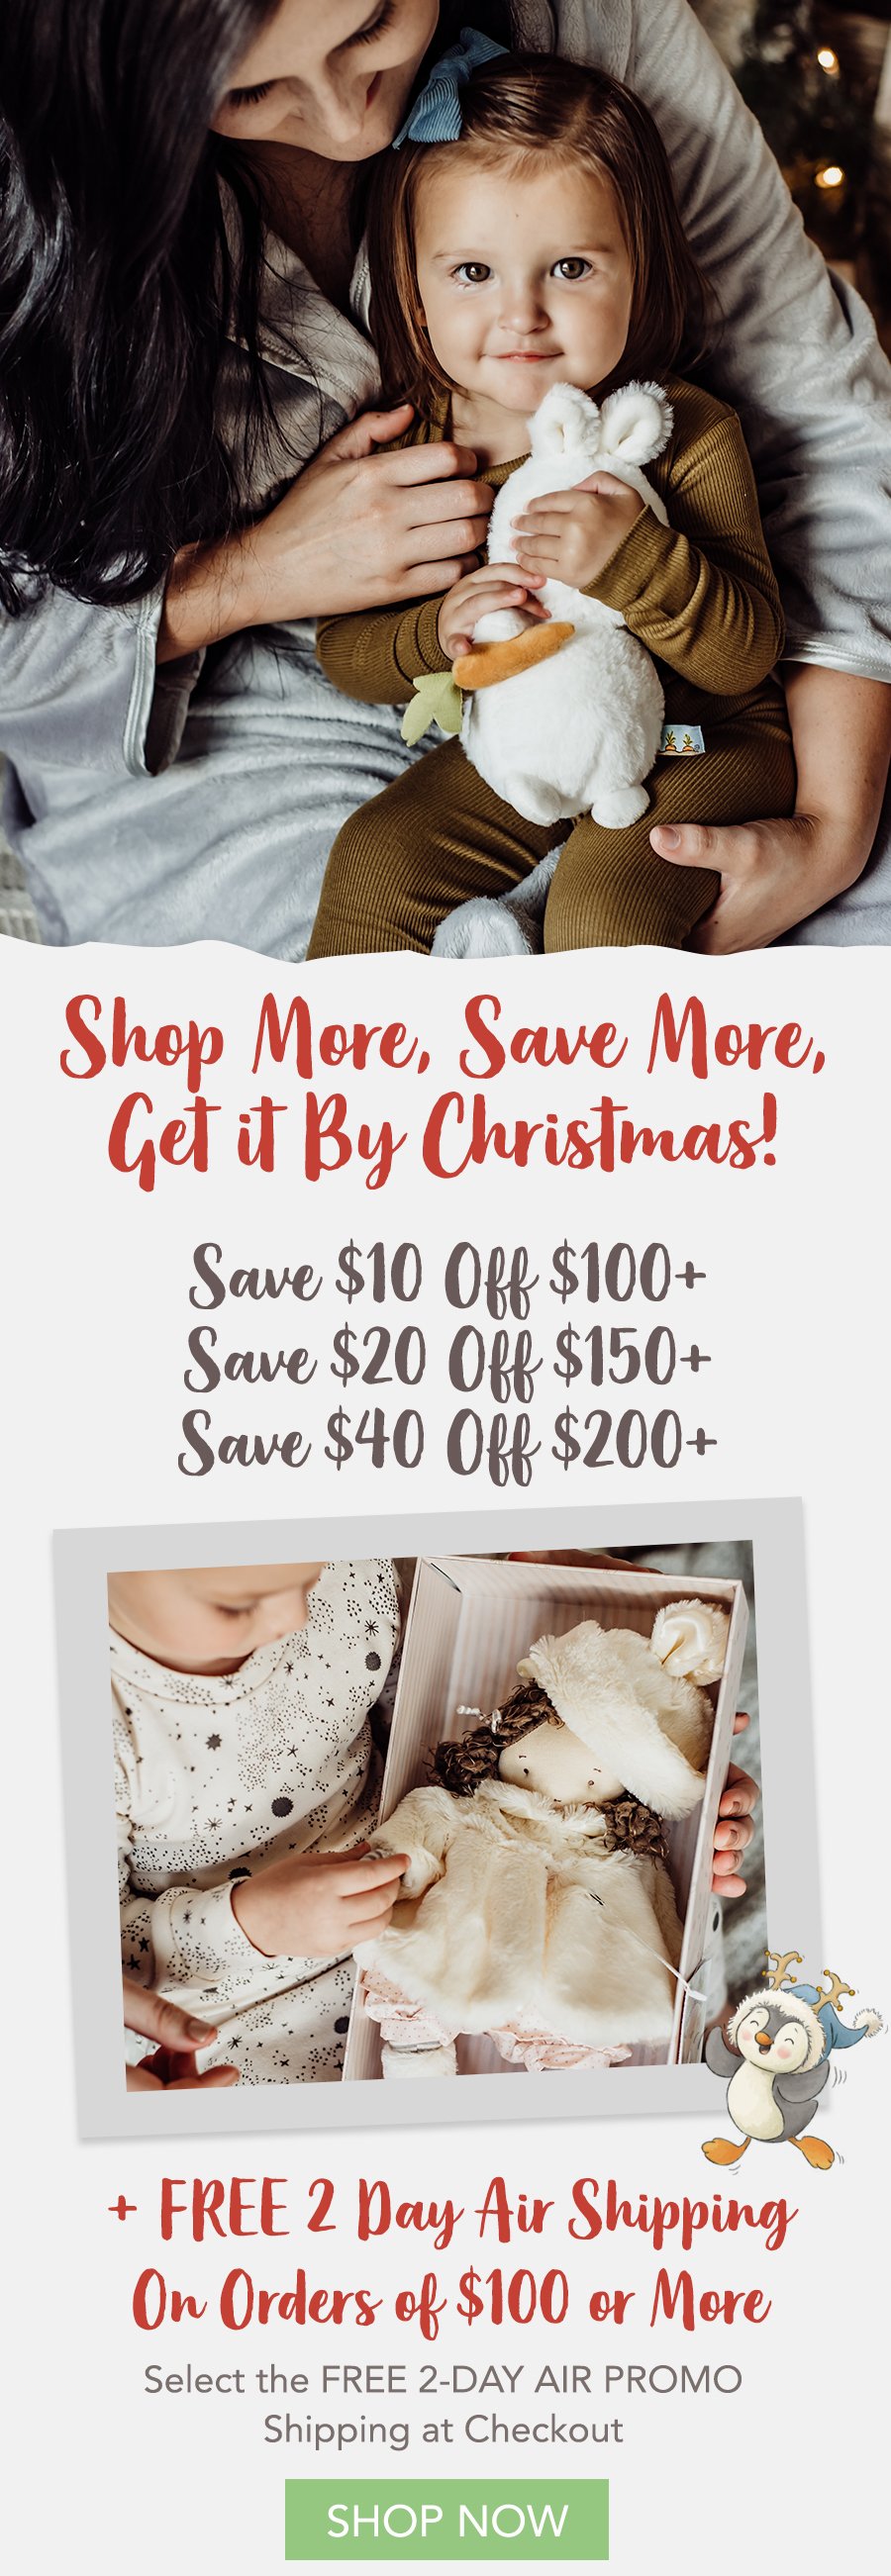 Shop More - Save More AND Get it by Christmas!